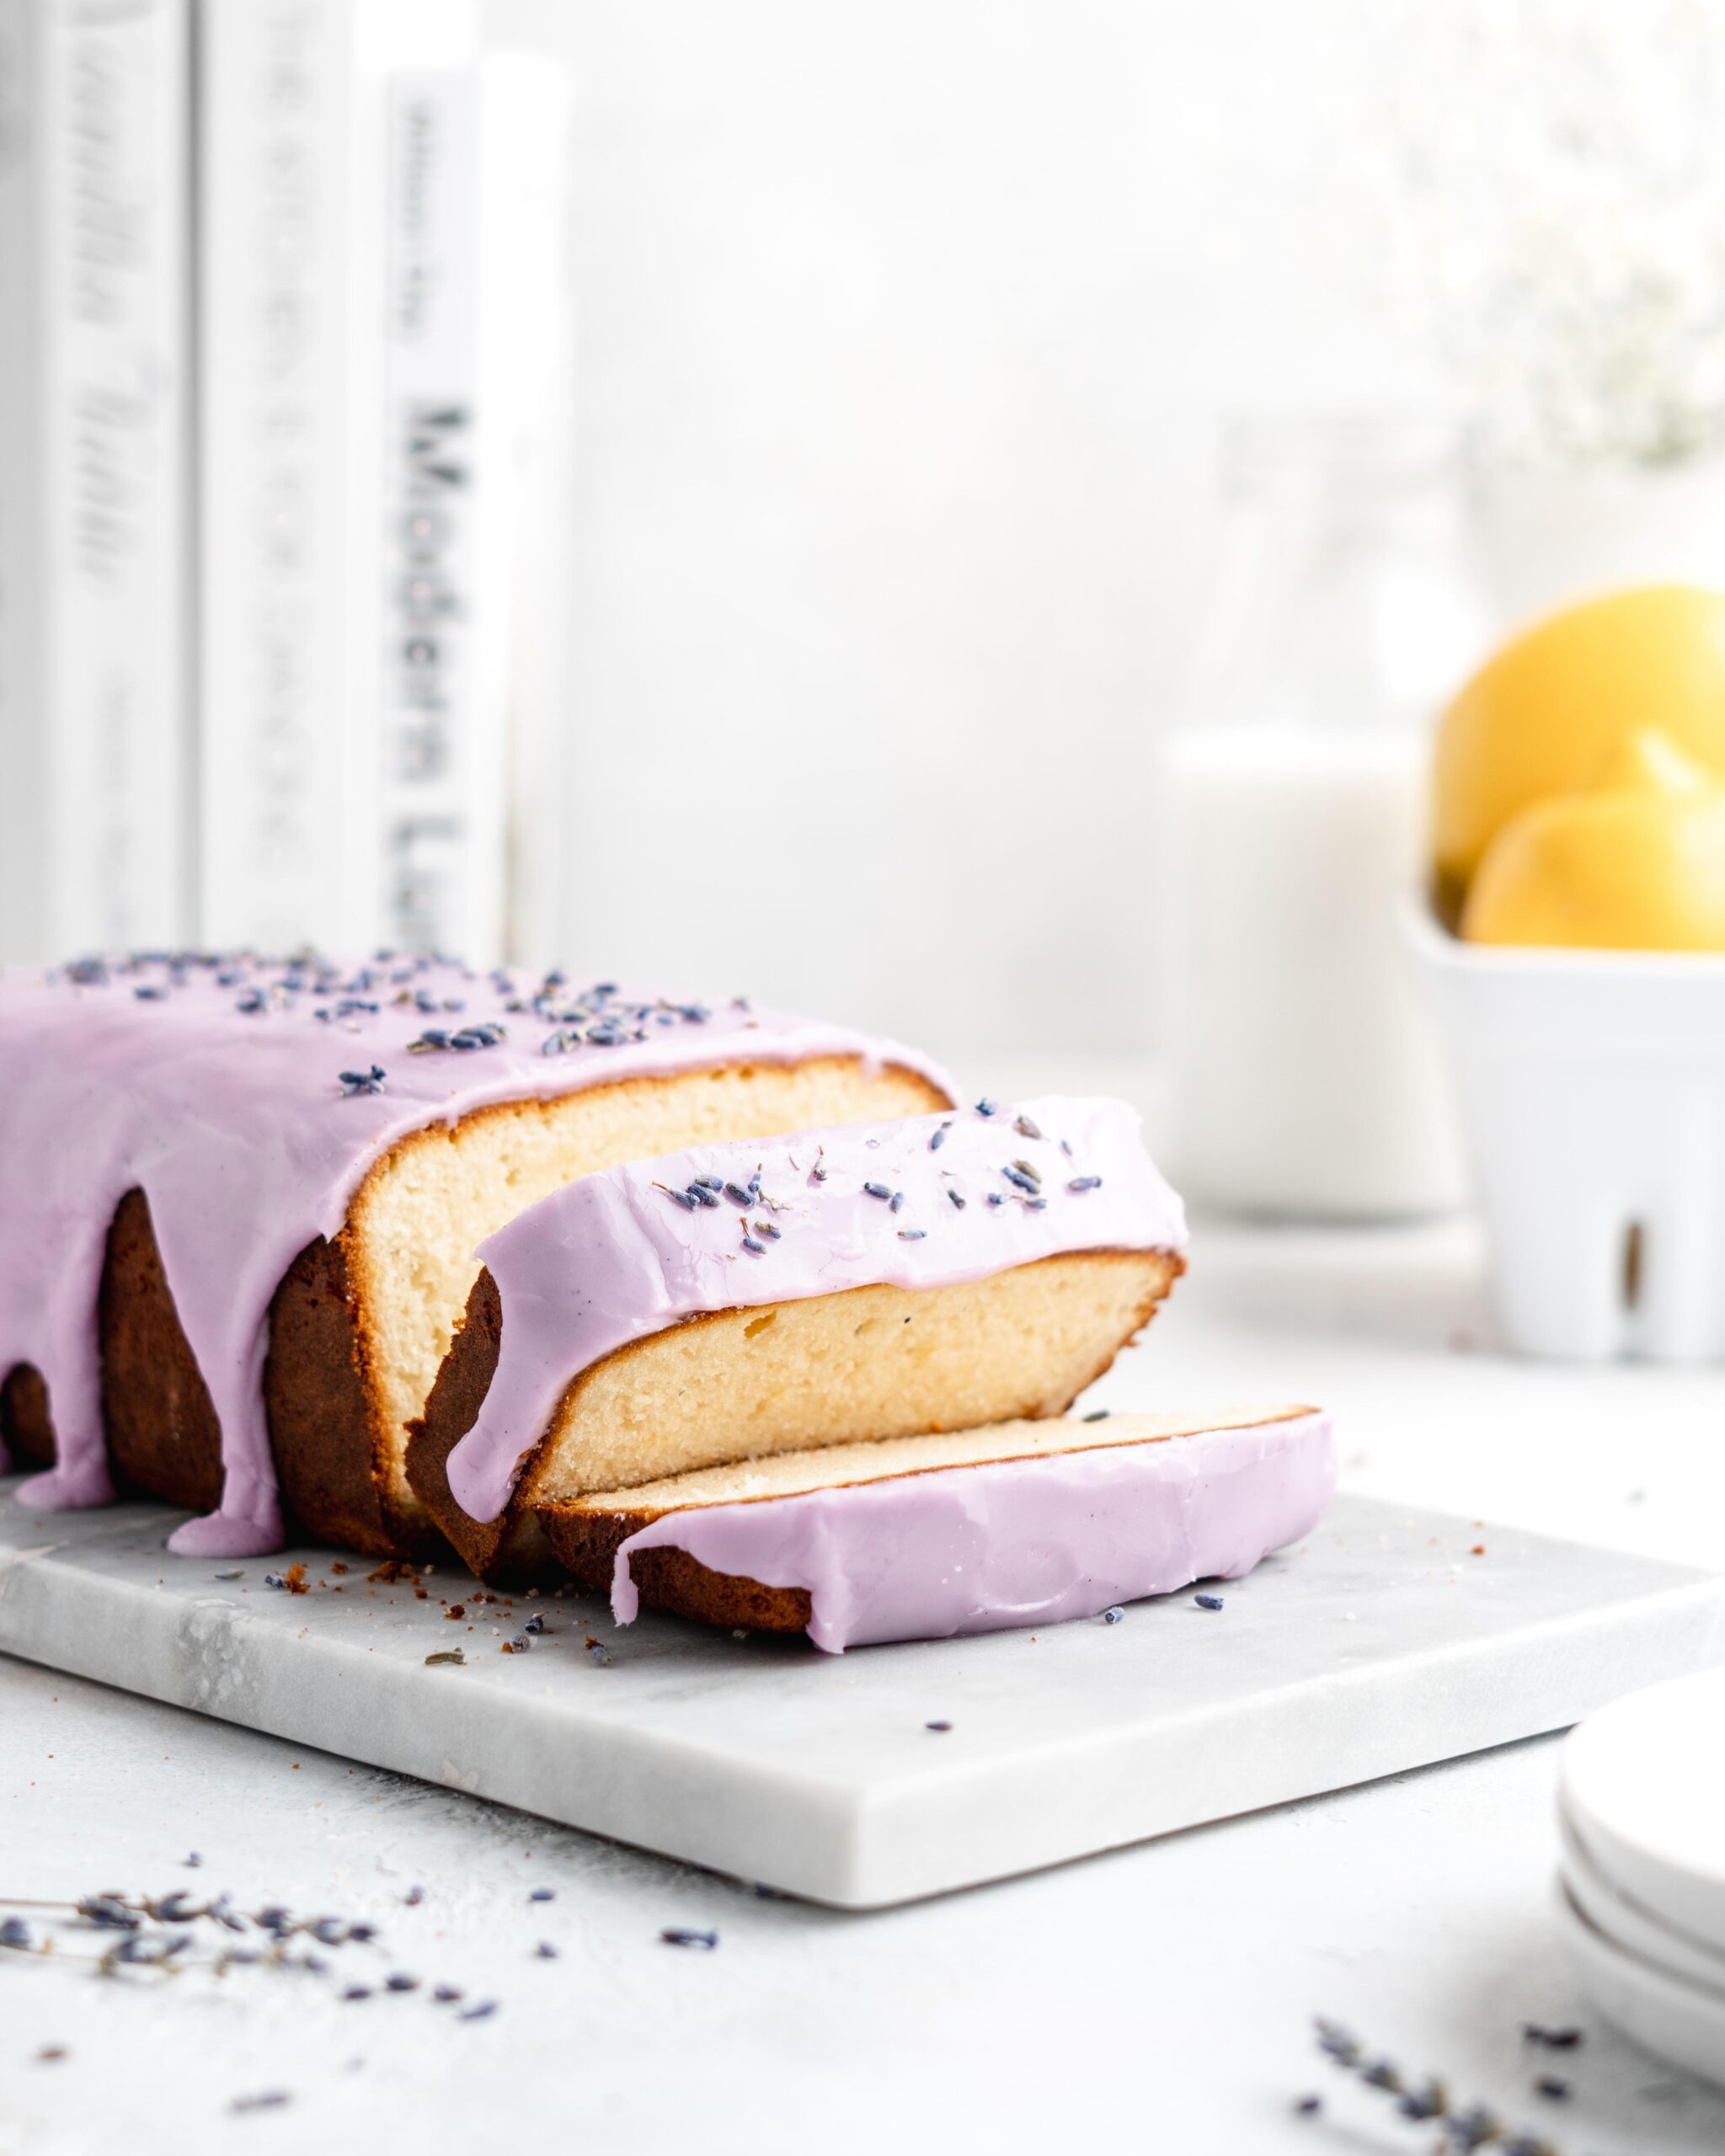  Perfectly moist and flavorful Lavender-Lemon Pound Cake